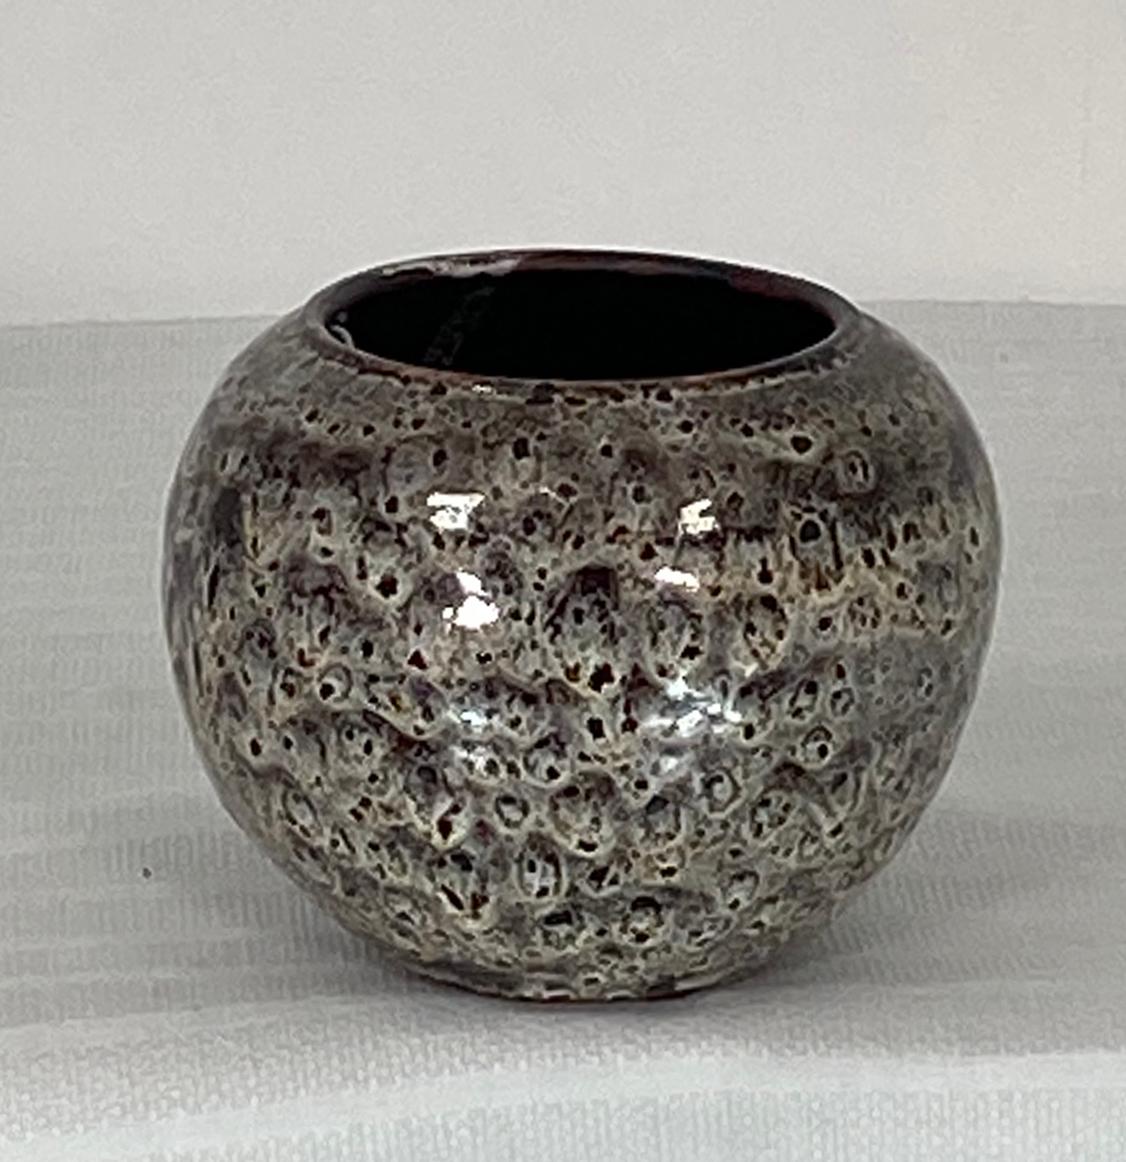 Vintage Clary Von Ruckteschell-Trueb Studio Art Pottery Vase. Has a beautiful
textured hi-gloss glaze. Hand thrown studio ceramic vase from the 20th century. 4 inches high with a 5 inch diameter. Clary Von Ruckteschell-Trueb was a Swiss - German